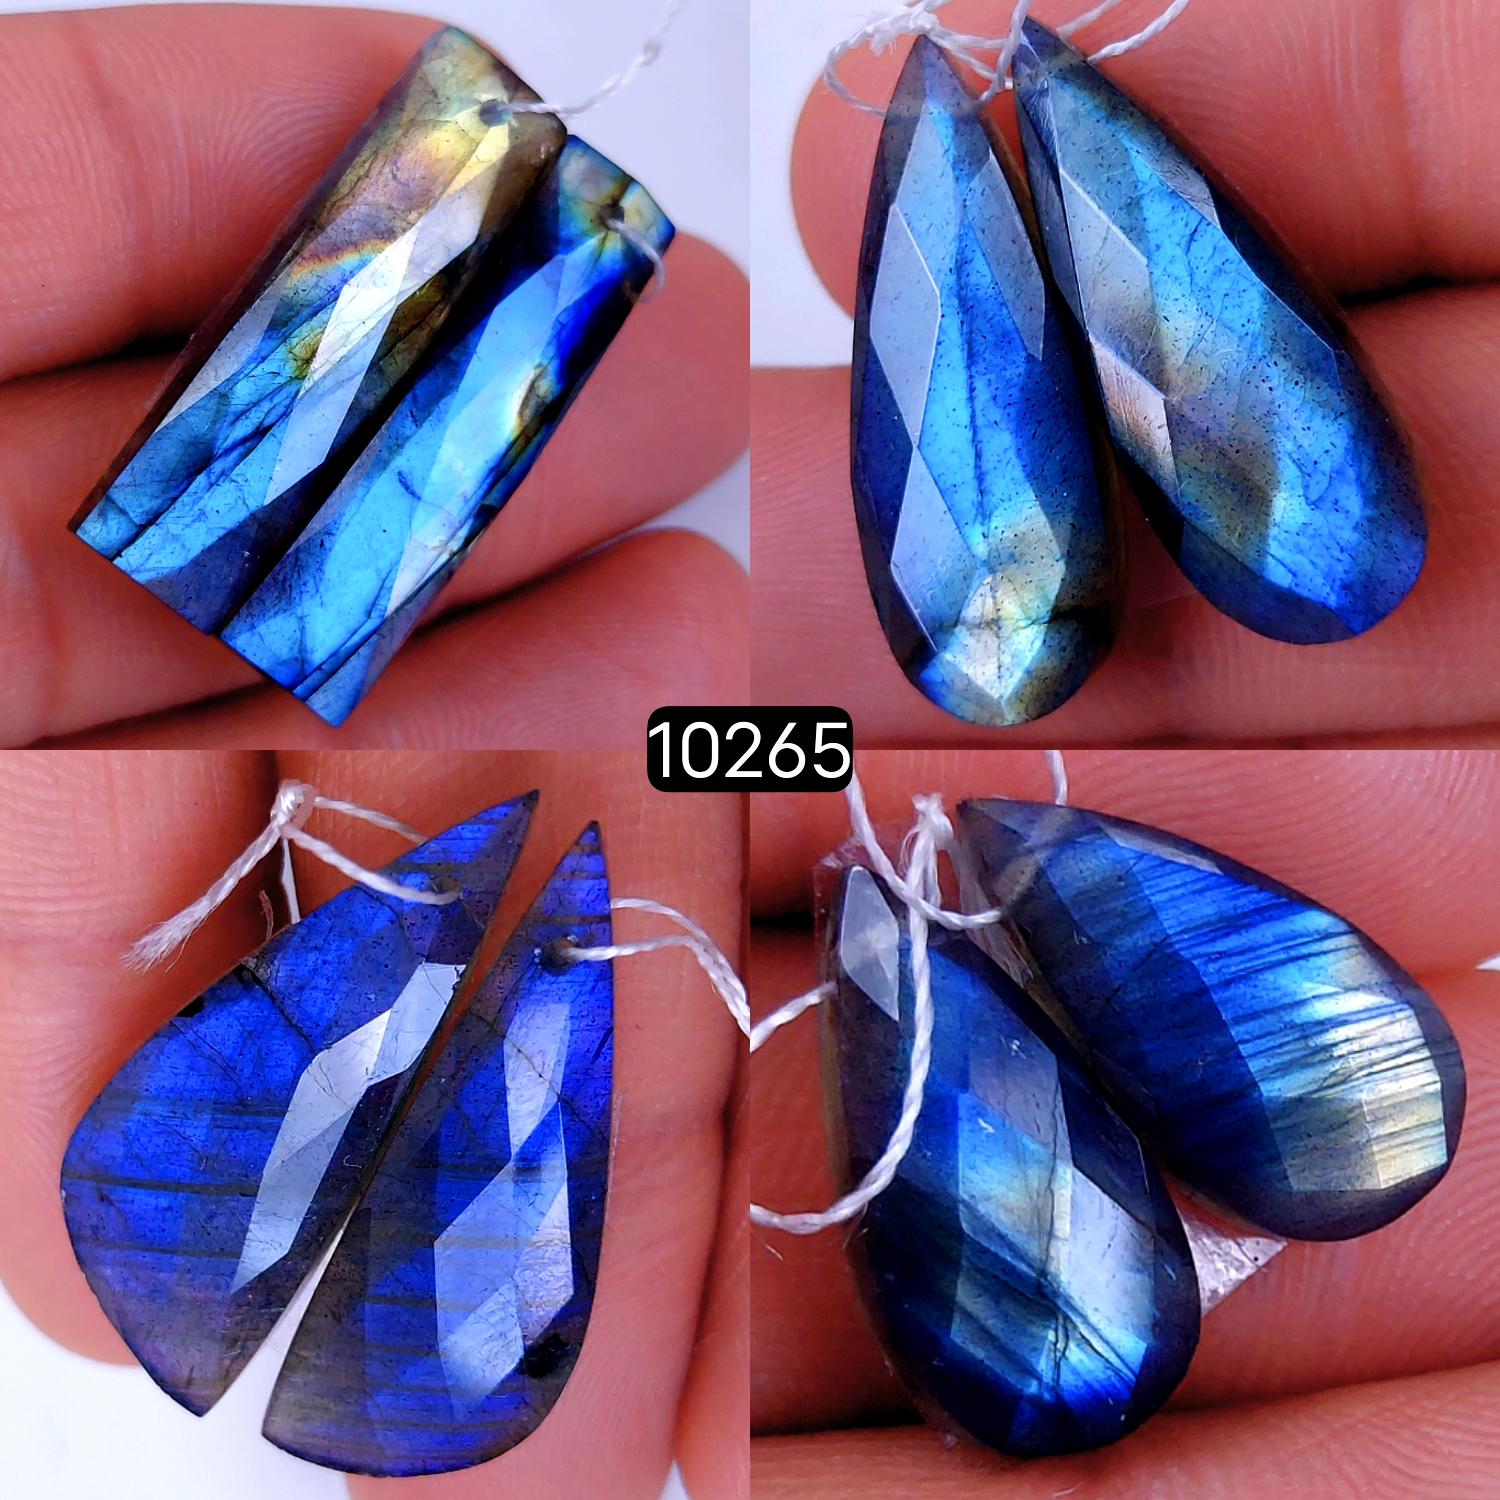 4Pair 86Cts Natural Labradorite Faceted Crystal Drill Dangle Drop Earring Pairs Silver Earrings Rose cut Labradorite Hoop Jewelry  32X7 19X8mm #10265